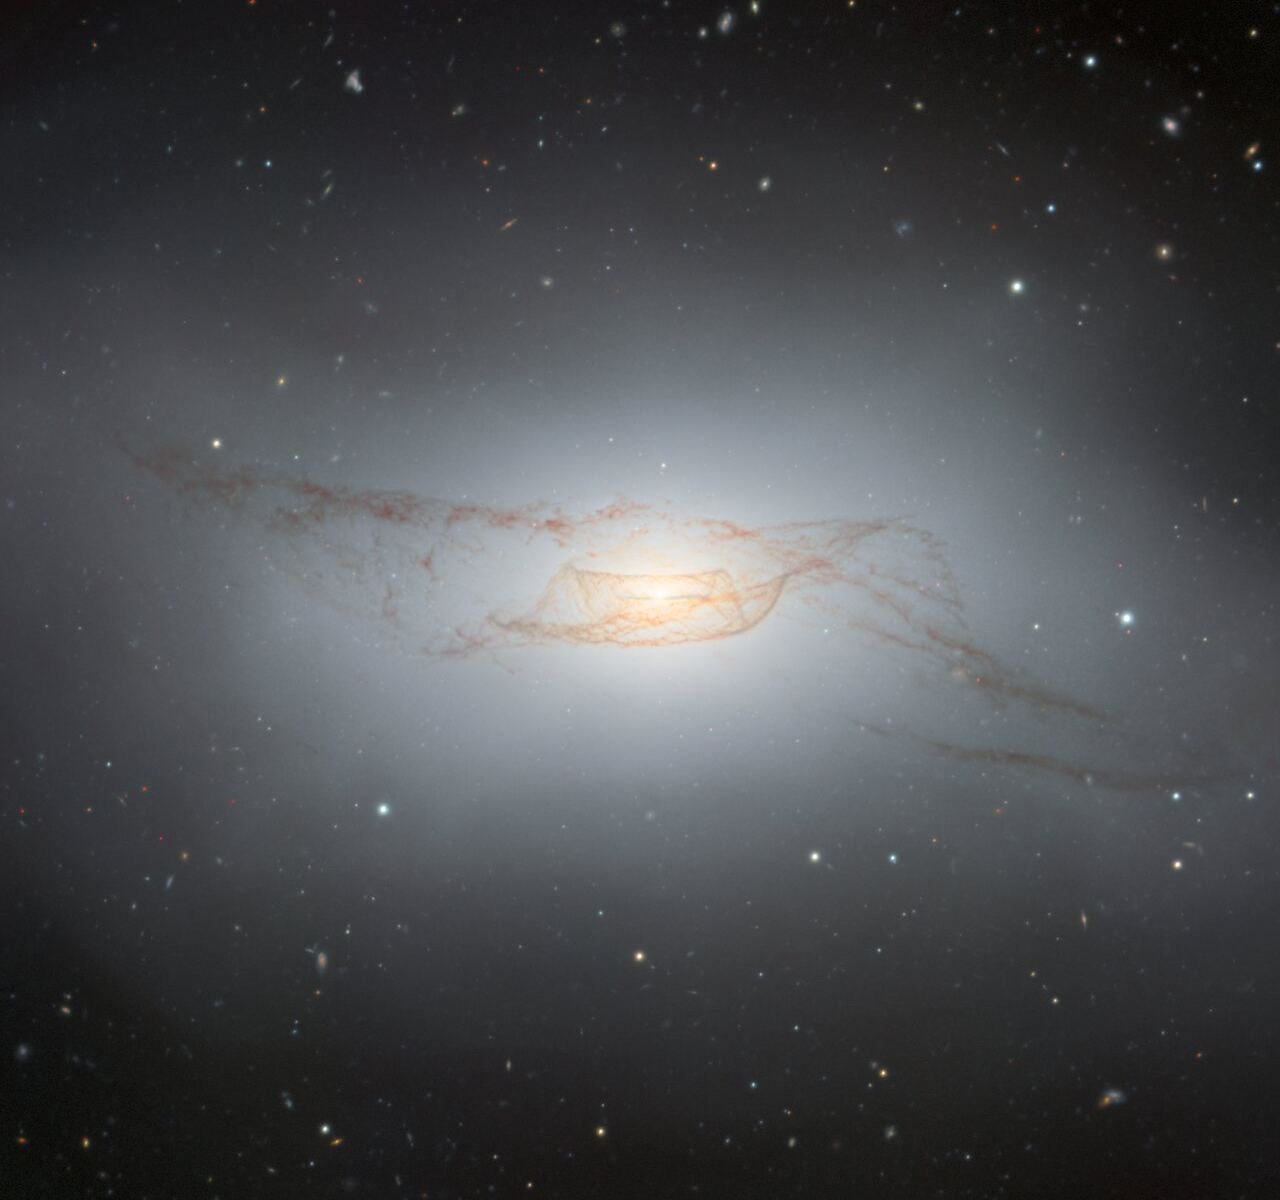 The Gemini South telescope view of NGC 4753, a peculiar galaxy thought to have experienced a galactic merger. Courtesy International Gemini Observatory/NOIRLab/NSF/AURA